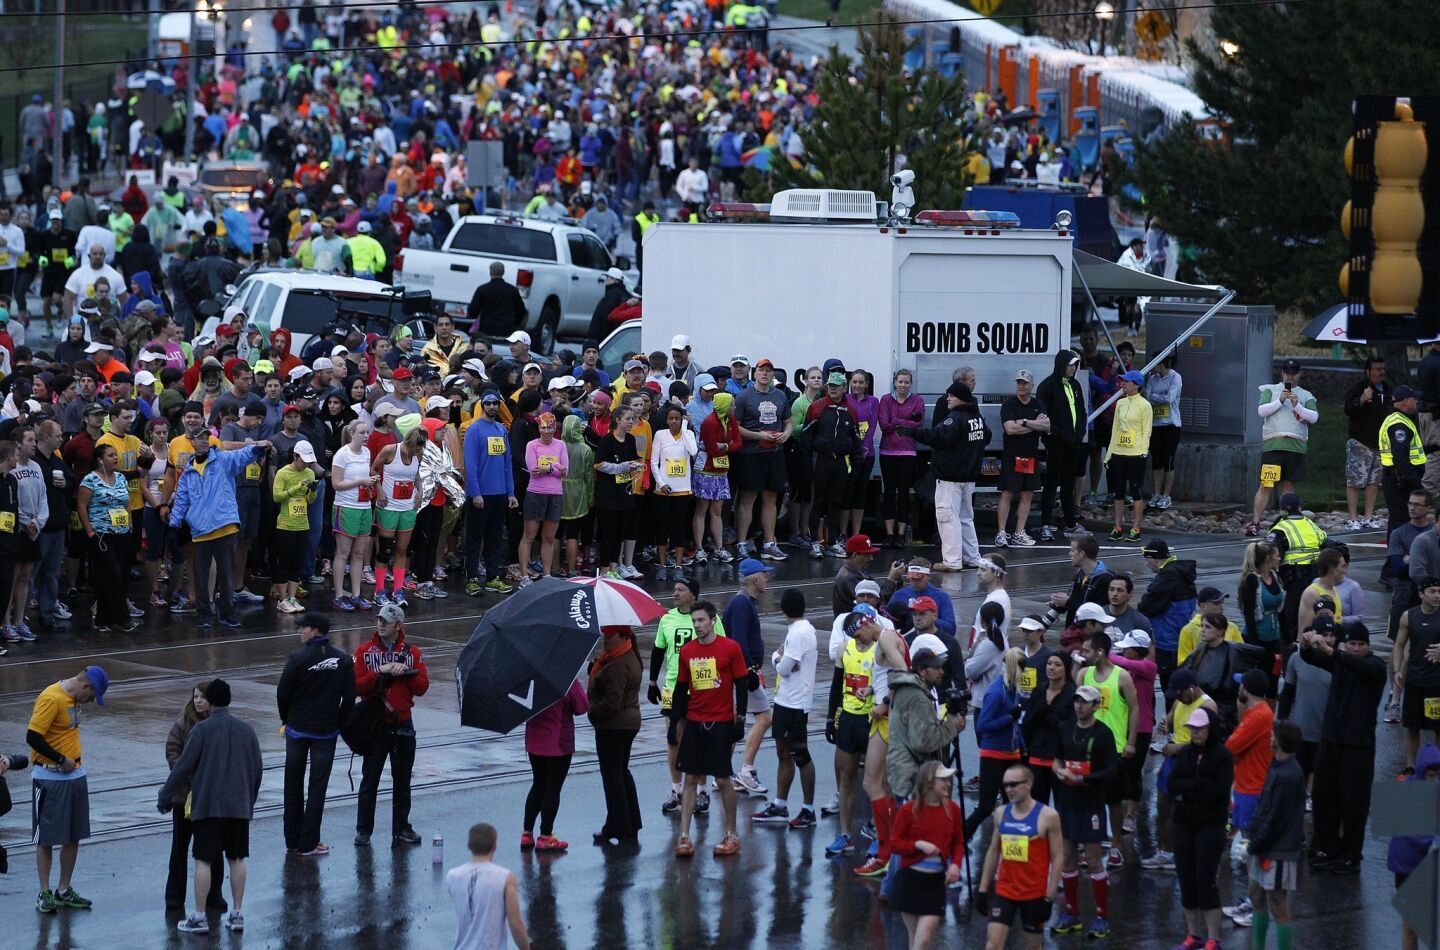 More than 2,000 miles from Boston, a bomb squad truck is a conspicuous presence Saturday near the starting line of the Salt Lake City Marathon. Security has been dramatically increased at sporting events across the country in the wake of Monday's bombings of the Boston Marathon.